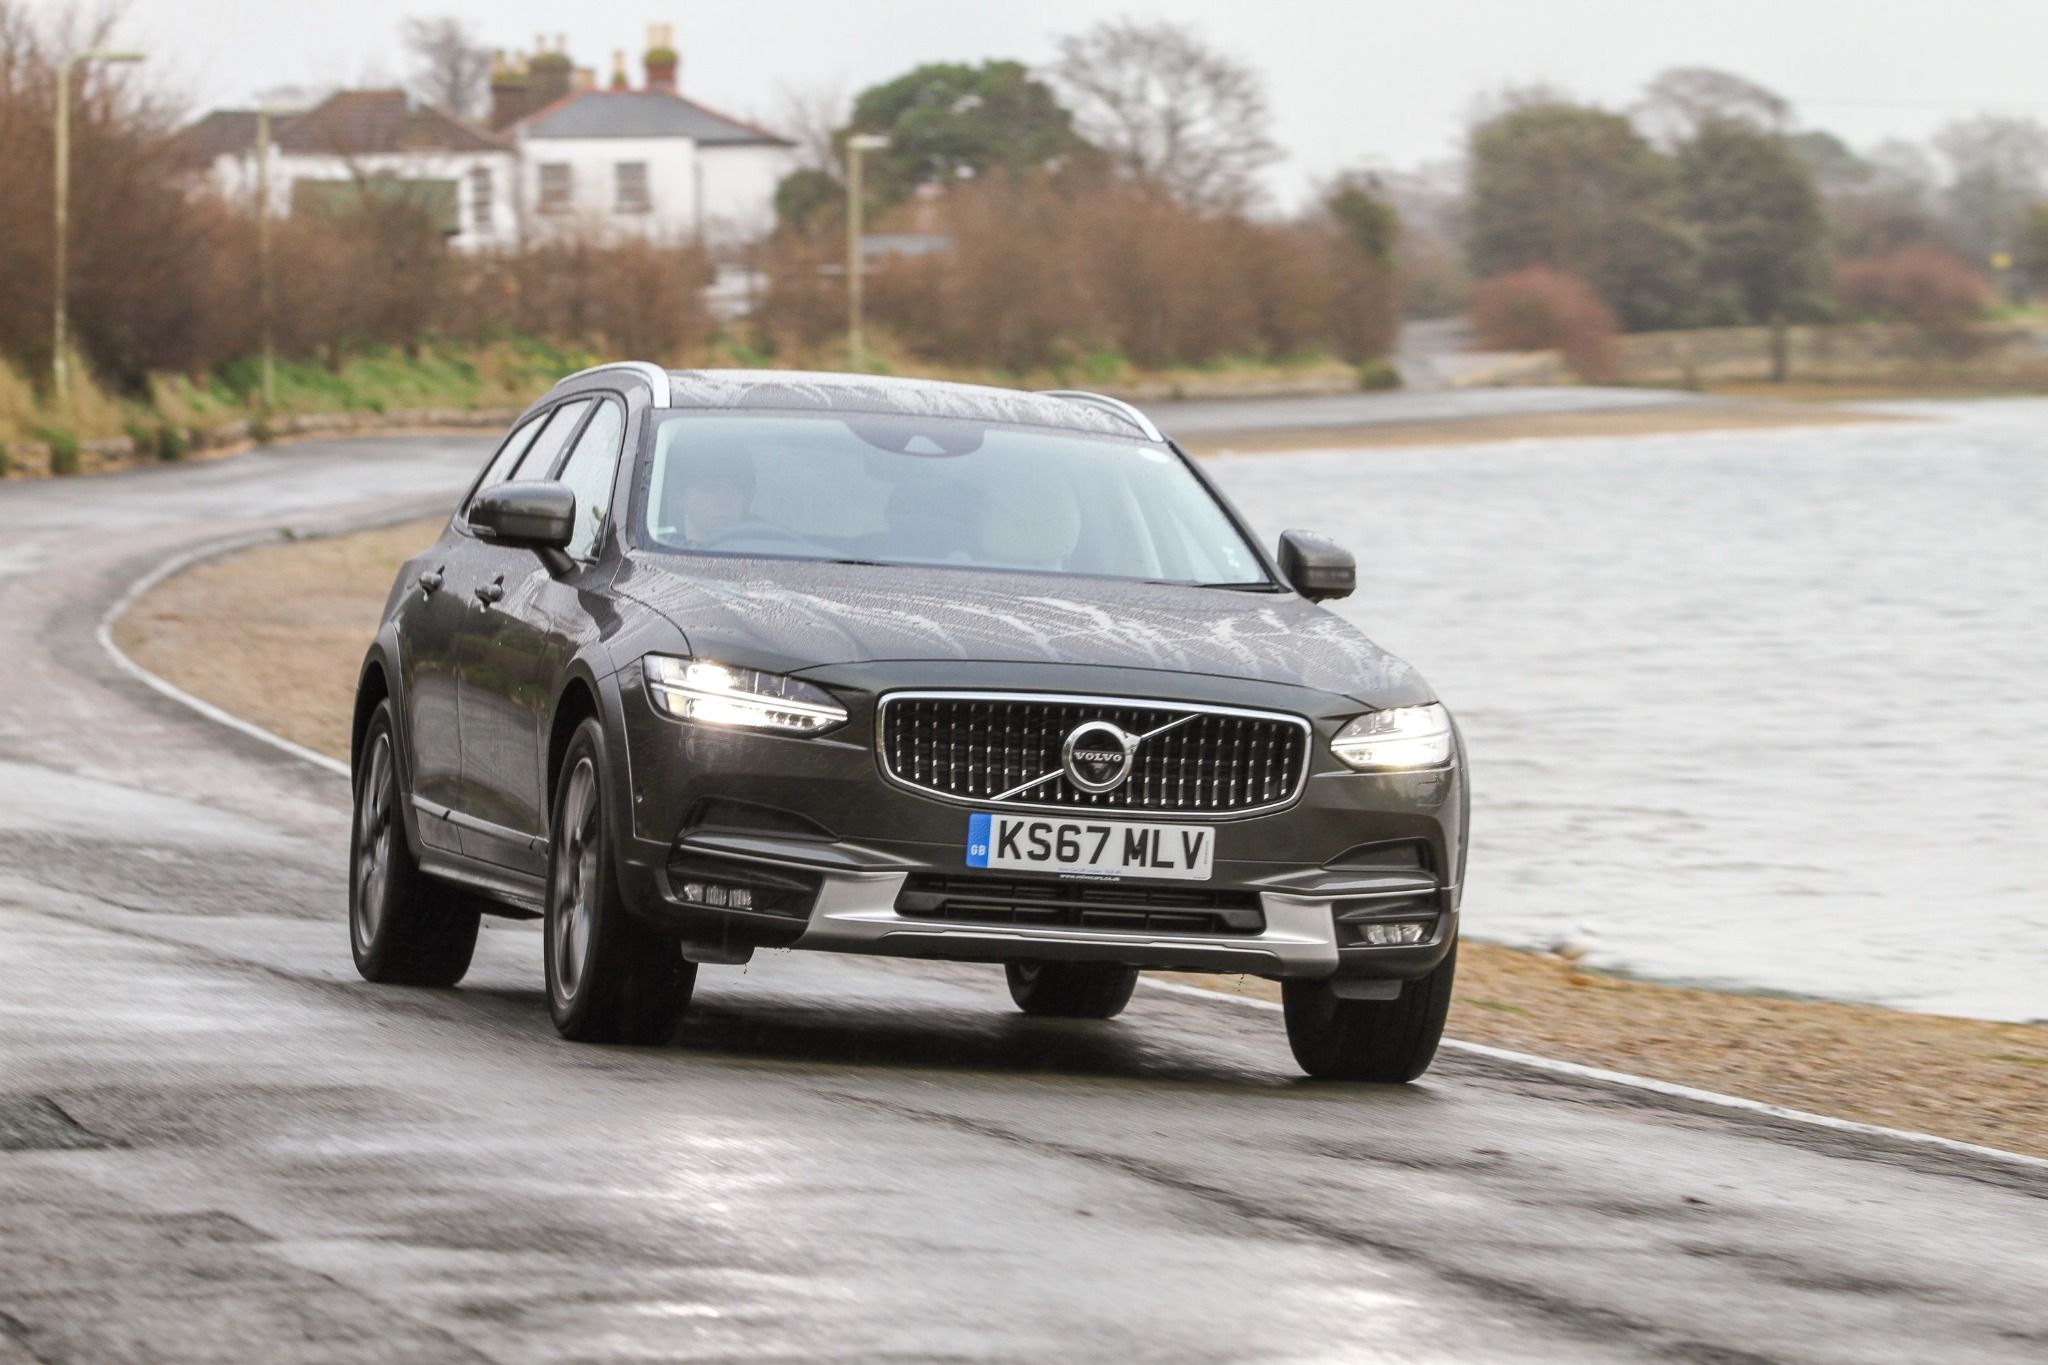 Volvo V90 driving down the road